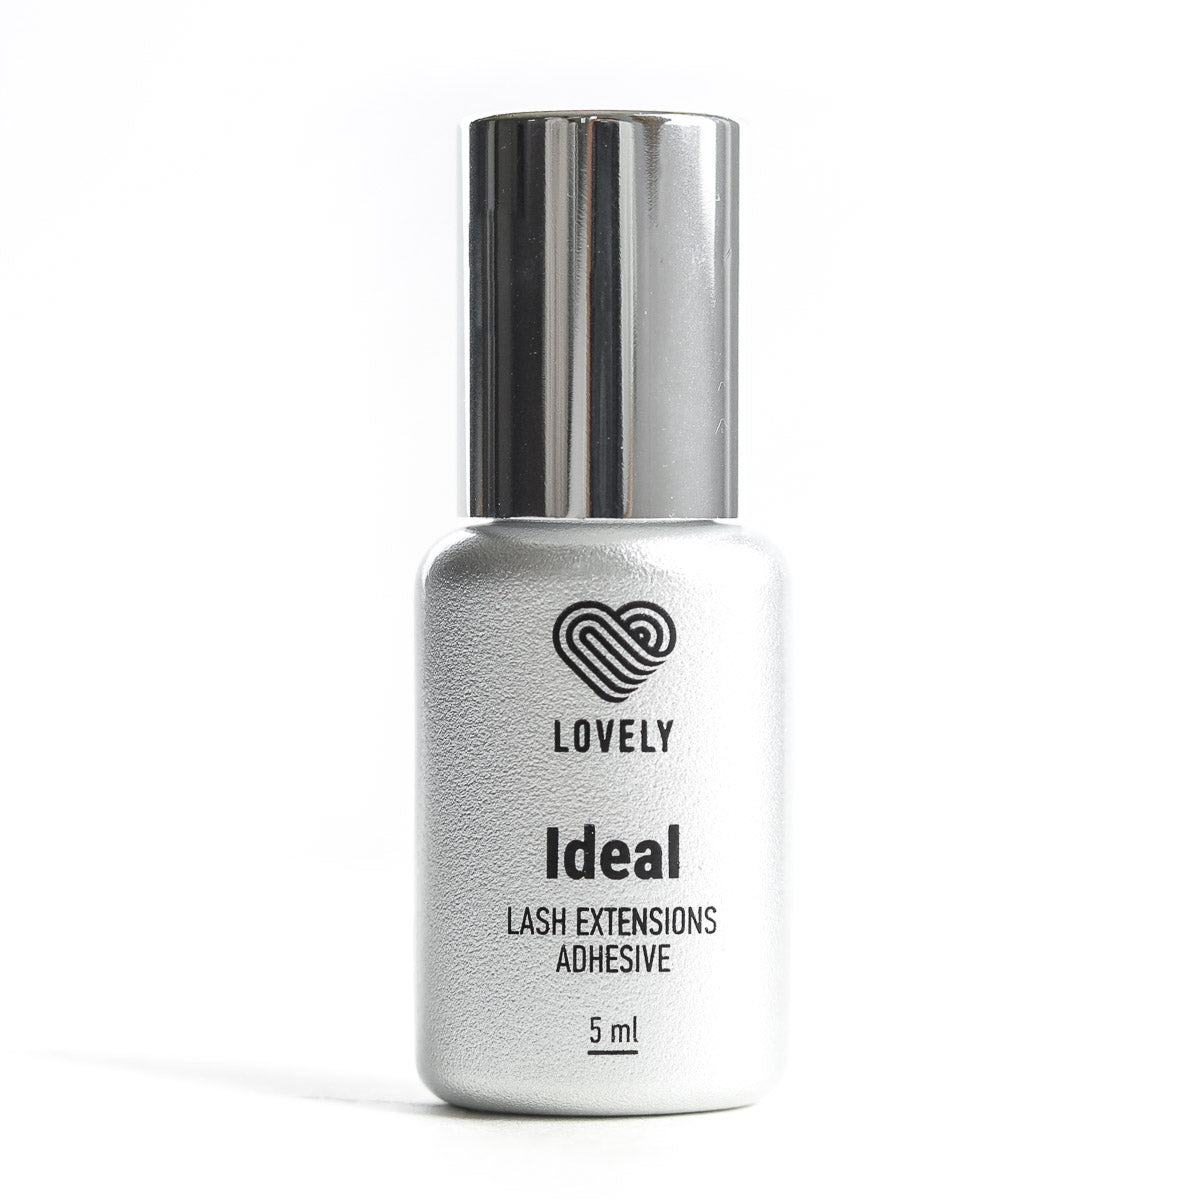 Ideal Eyelash Extension Glue by Lovely US